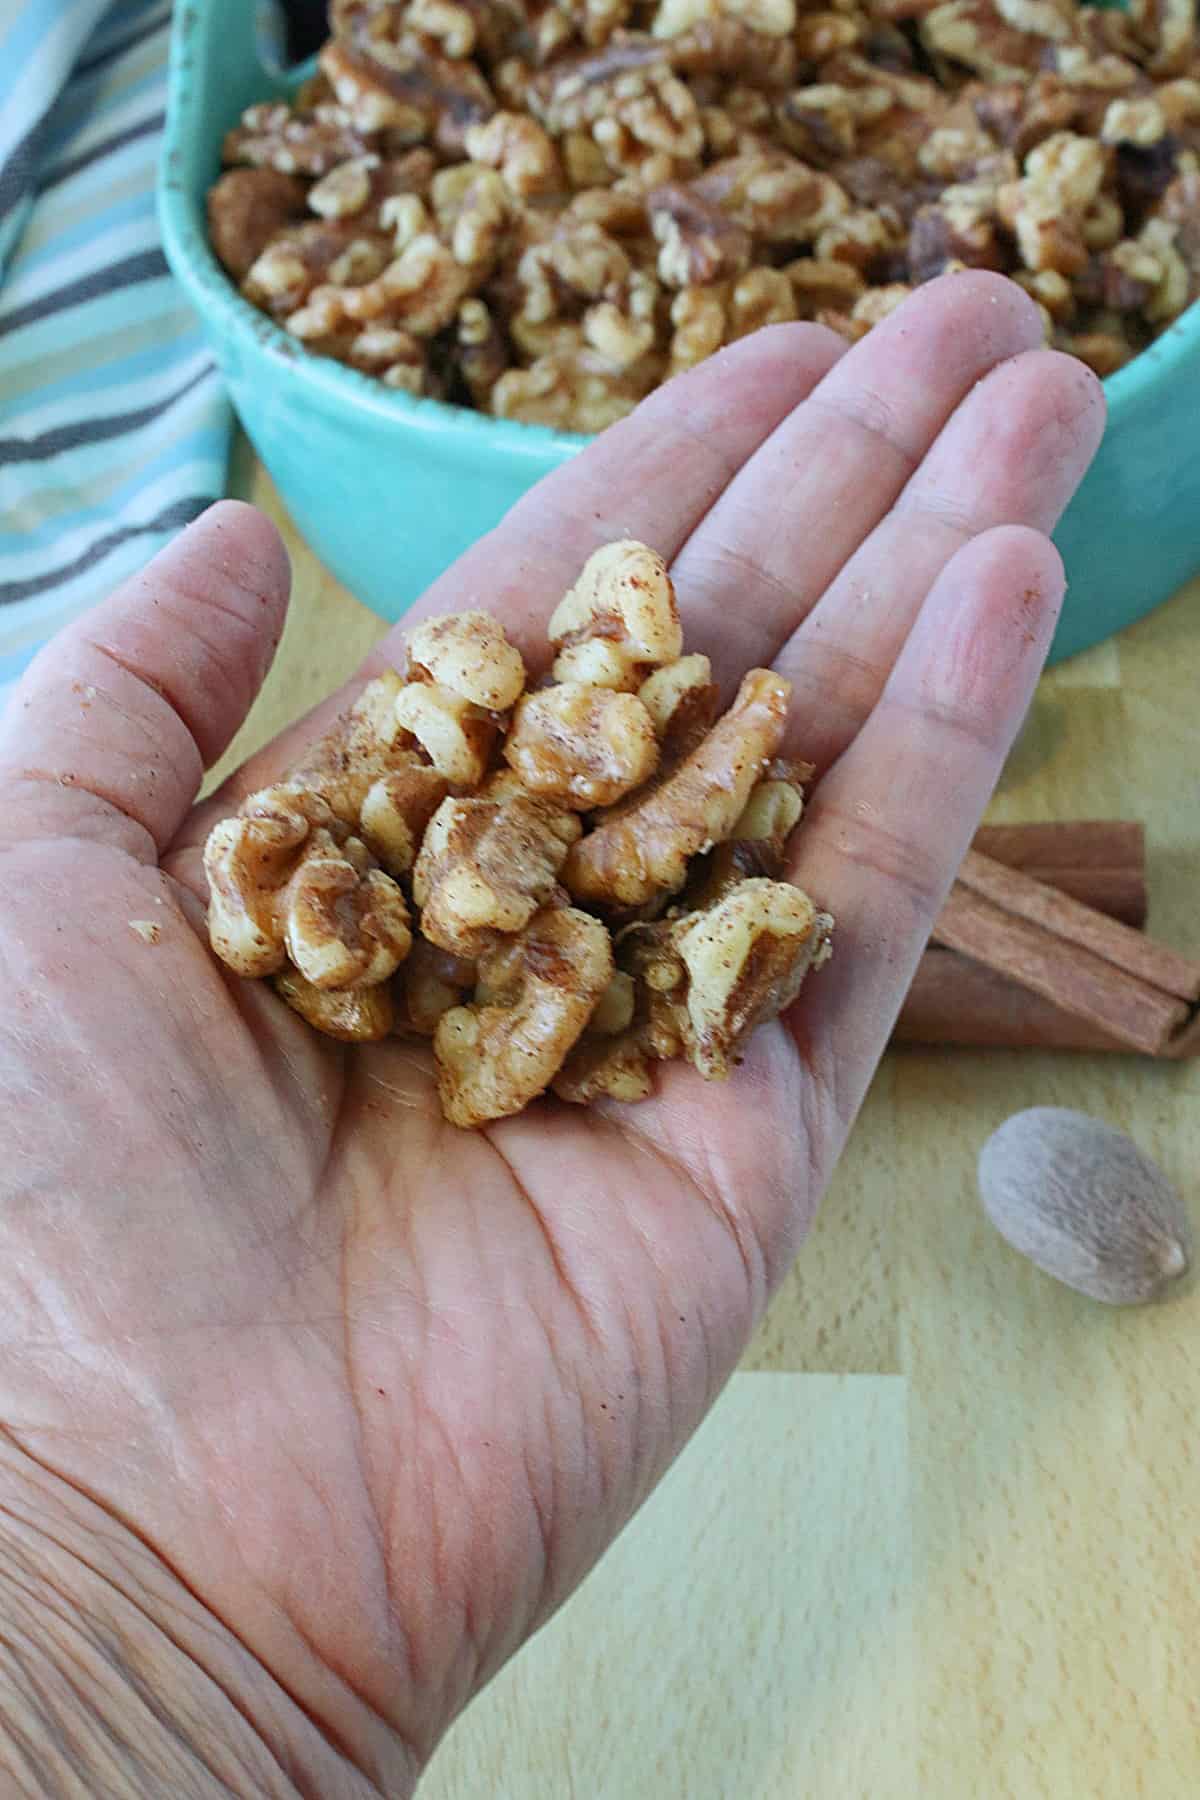 A hand holding a serving of Healthy Cinnamon Roasted Walnuts.